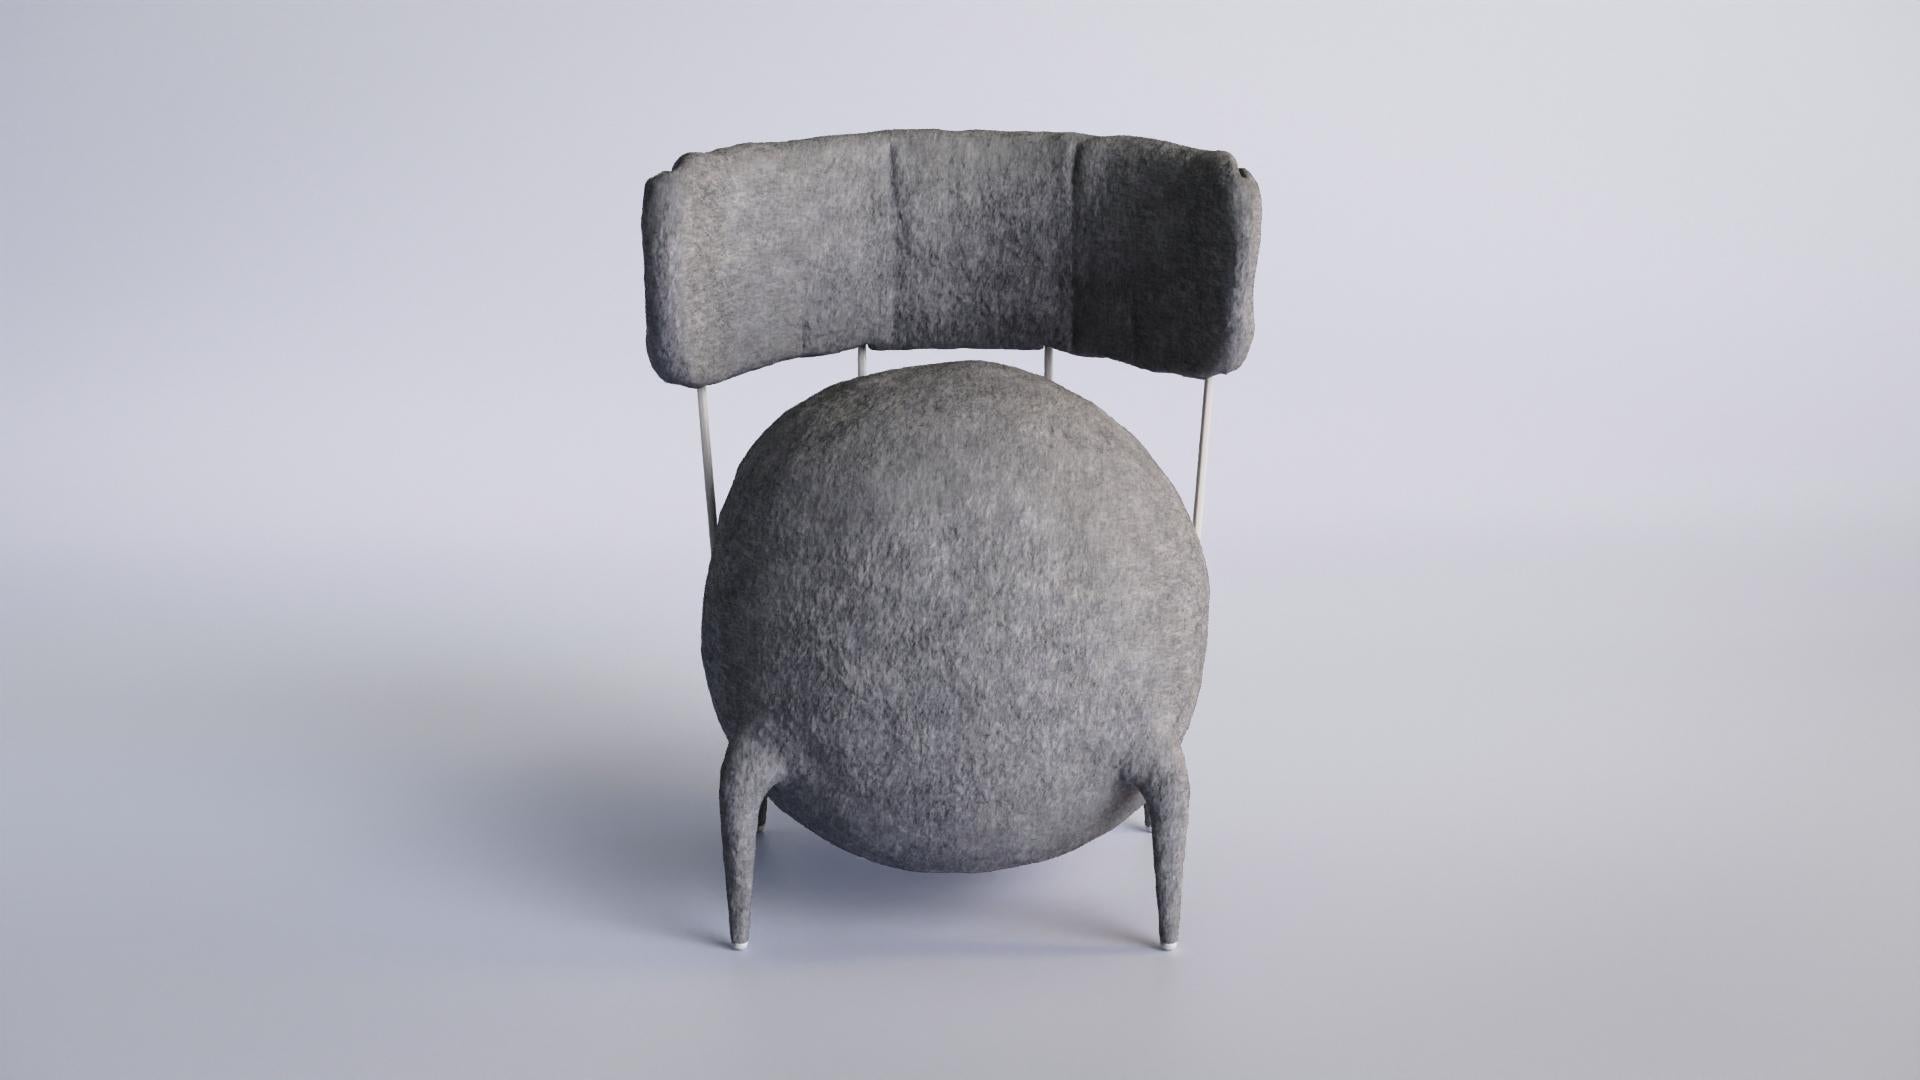 Lymphochair Chair by Taras Yoom
Limited Edition of 50
Dimensions: D 62 x W 62 x H 80 cm
Materials: Wood, metal, felt, PU.

The chair consists of a deep white pinkish felt cover, silver or white metal rods and blue or brown straps. The back of a